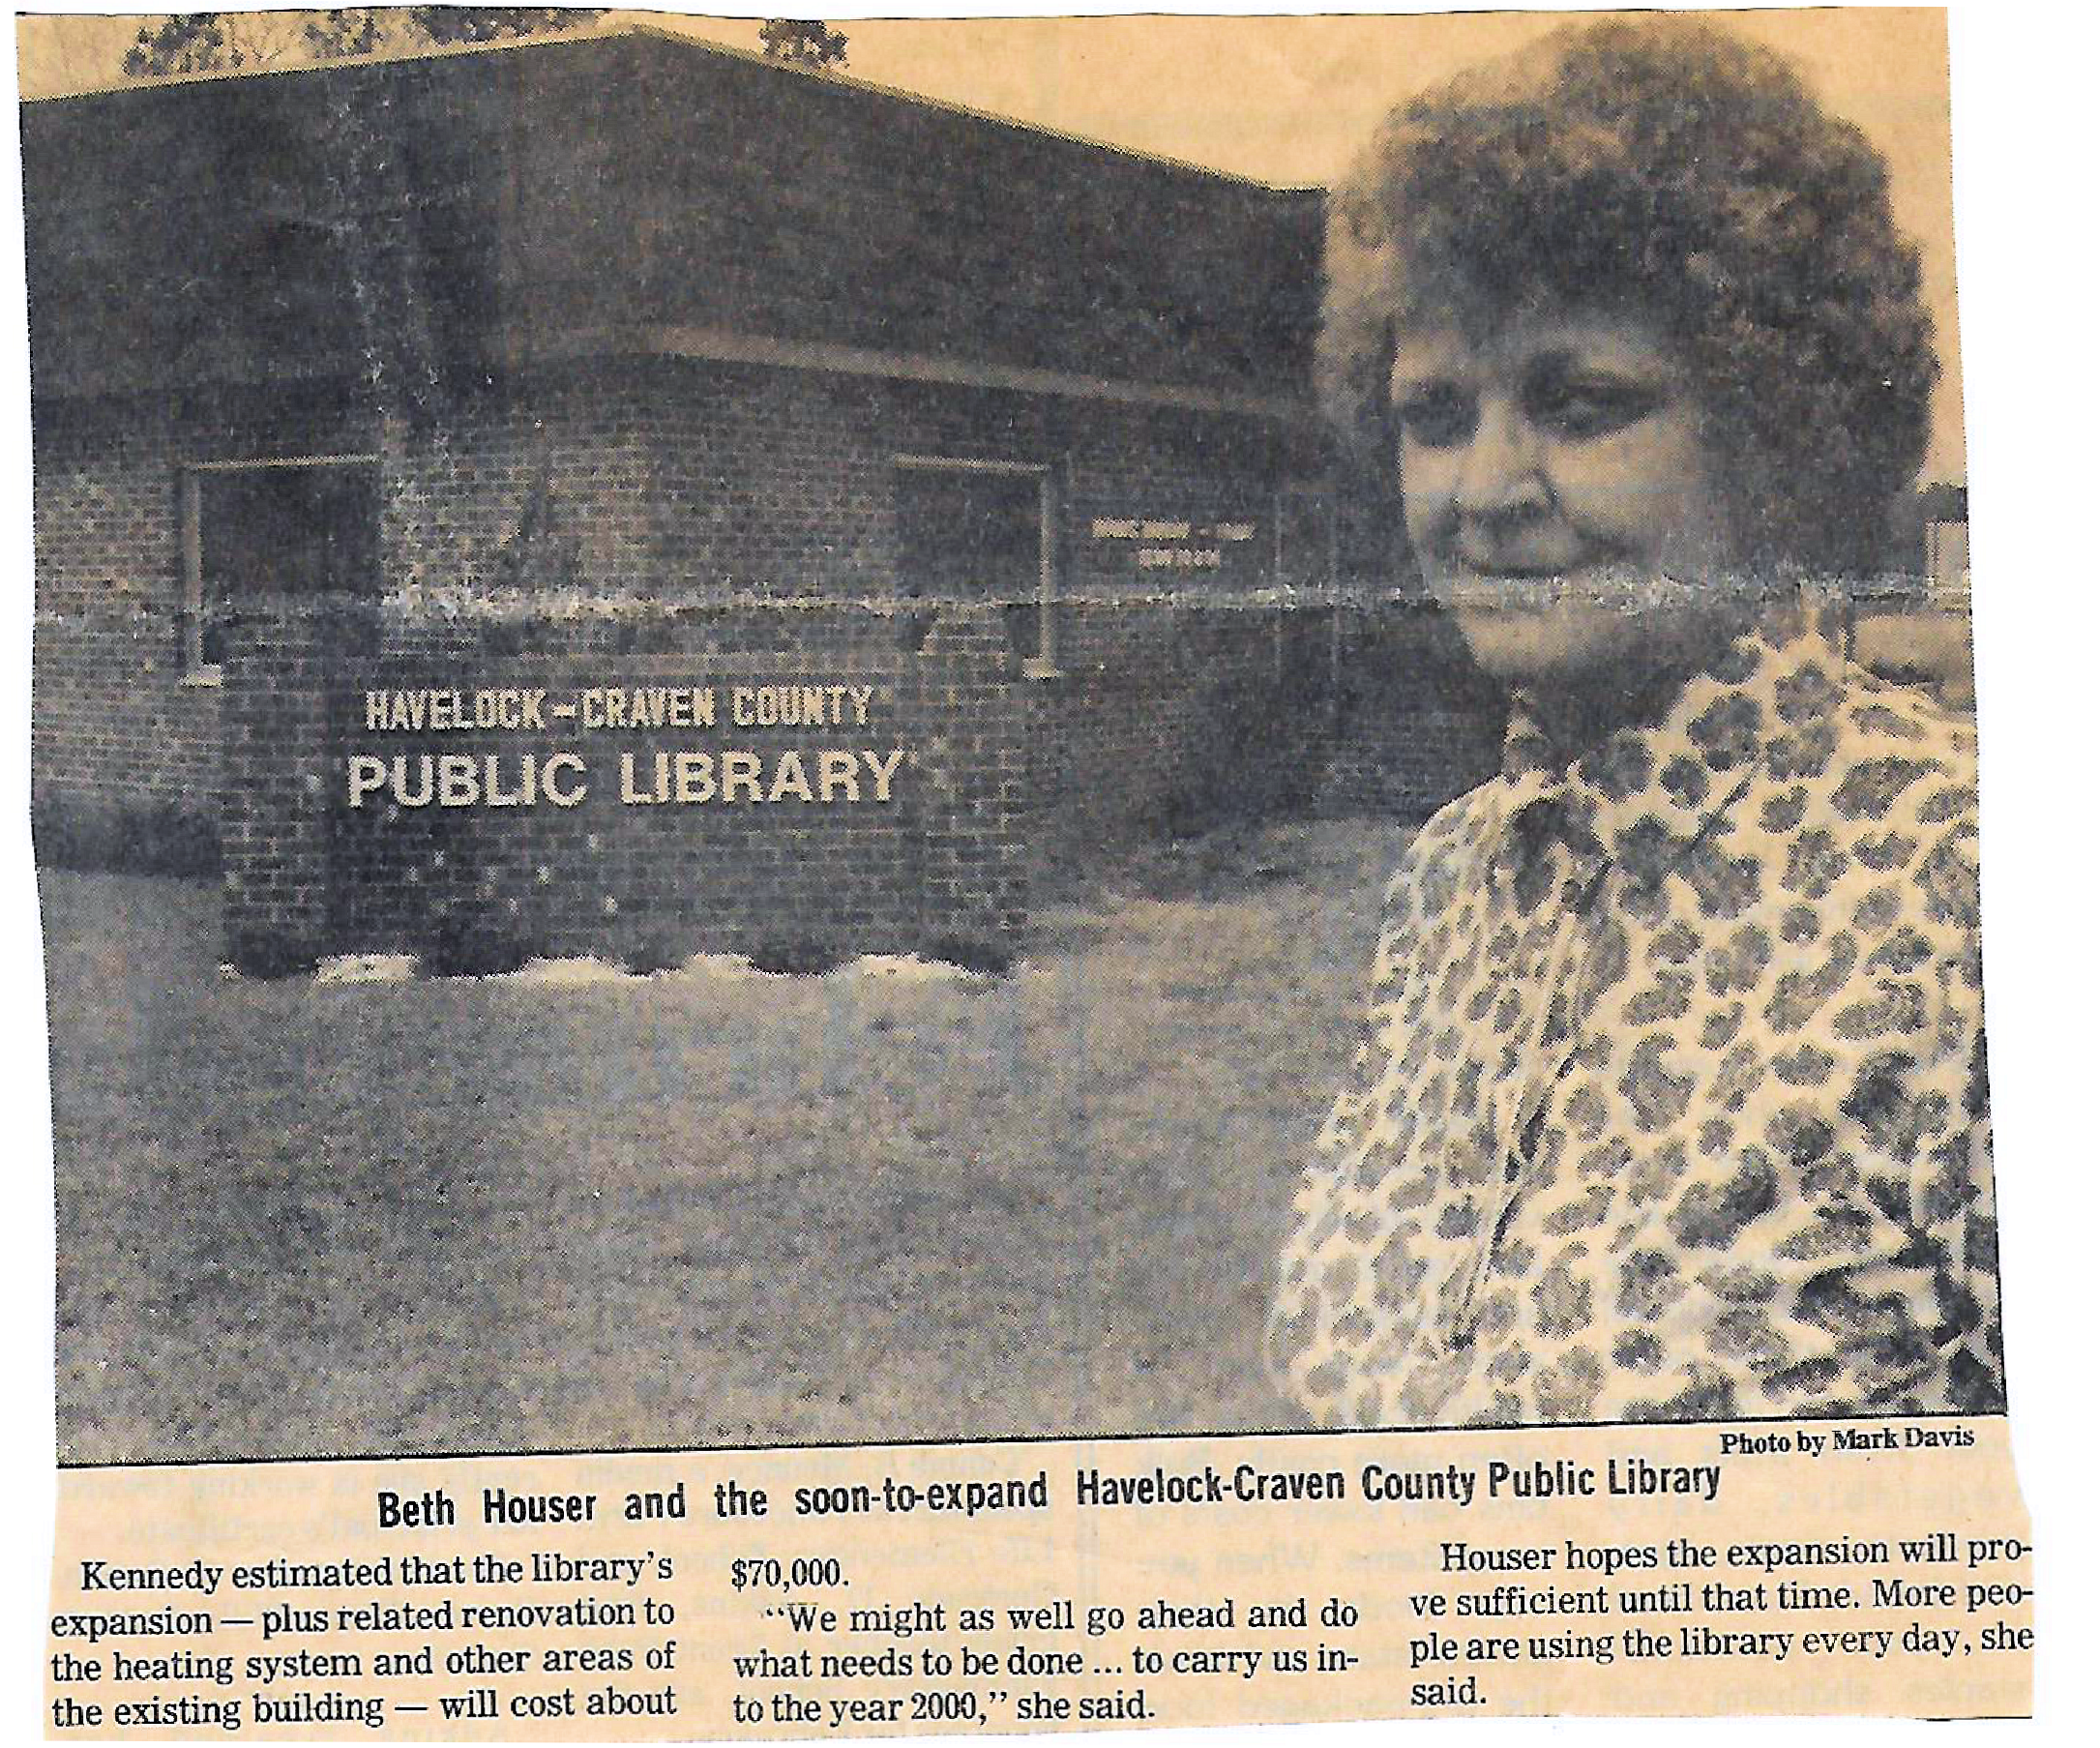 Beth Houser first librarian image